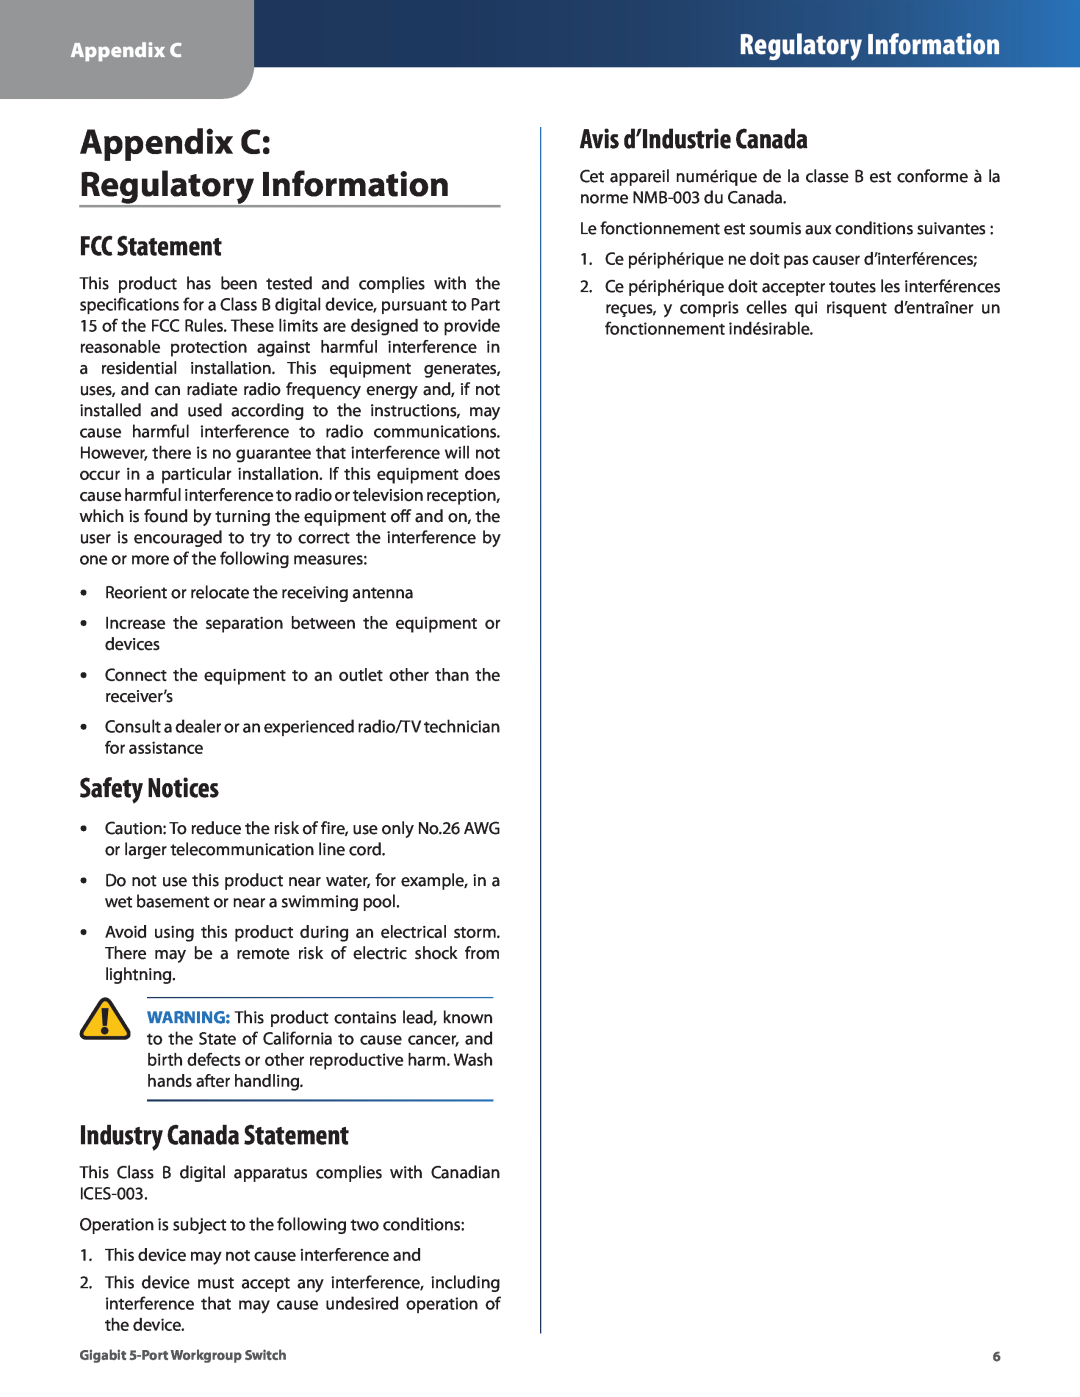 Cisco Systems EG005W manual Appendix C Regulatory Information, FCC Statement, Safety Notices, Industry Canada Statement 